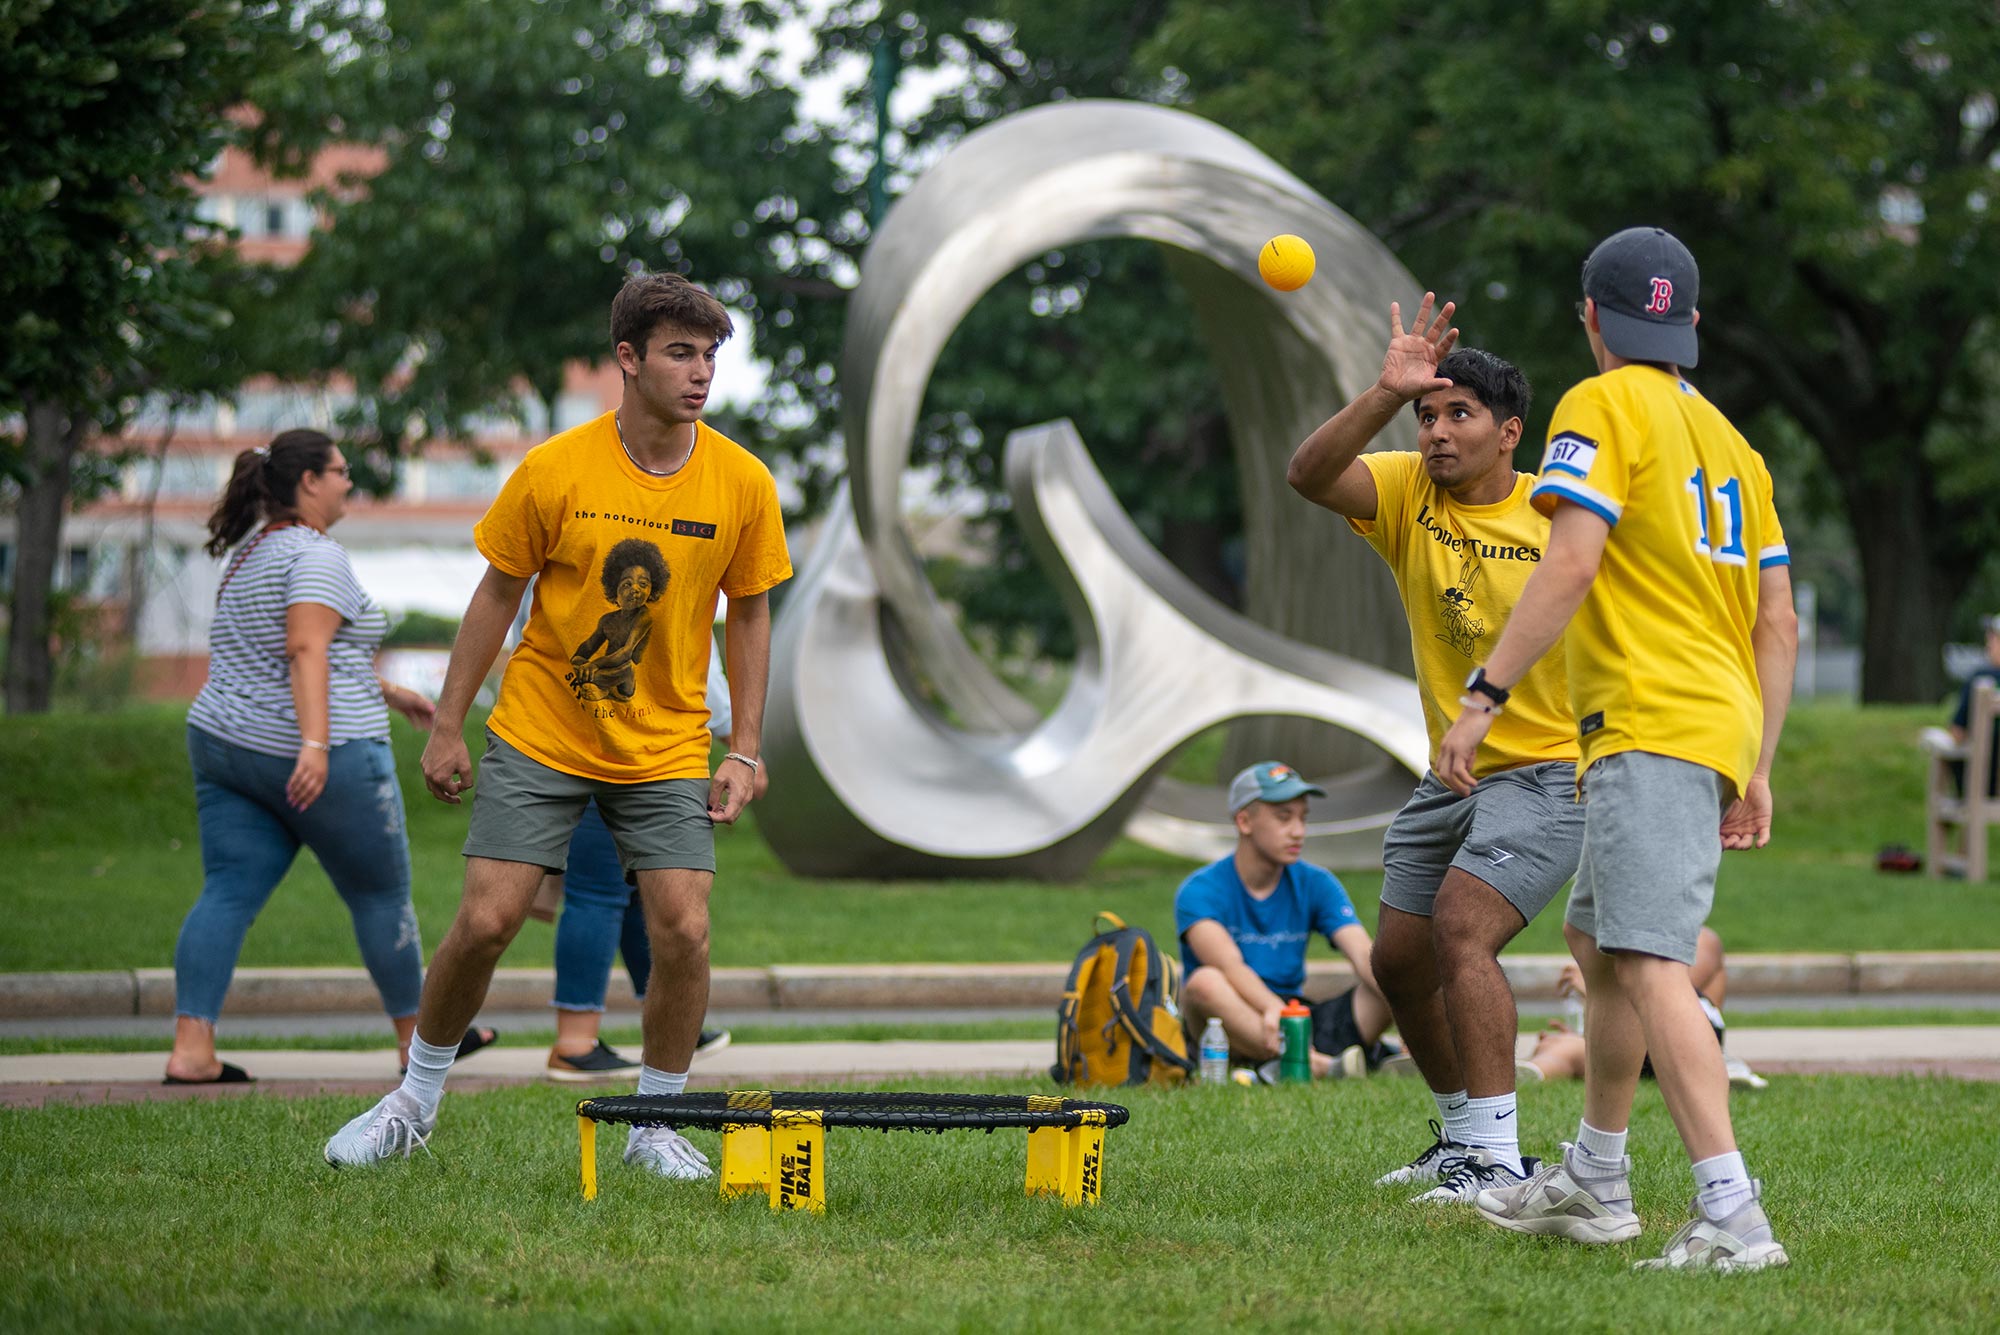 Photo of Jake Dietiker (Questrom’25), from left, Victor Verma (CAS’25), and Jeremy Gay (COM’25), playing spike ball on BU Beach August 30. They all wear bright yellow shirts and Verma reaches up to spike the small yellow ball as the others look on, Behind them, students sit in the grass or walk by.